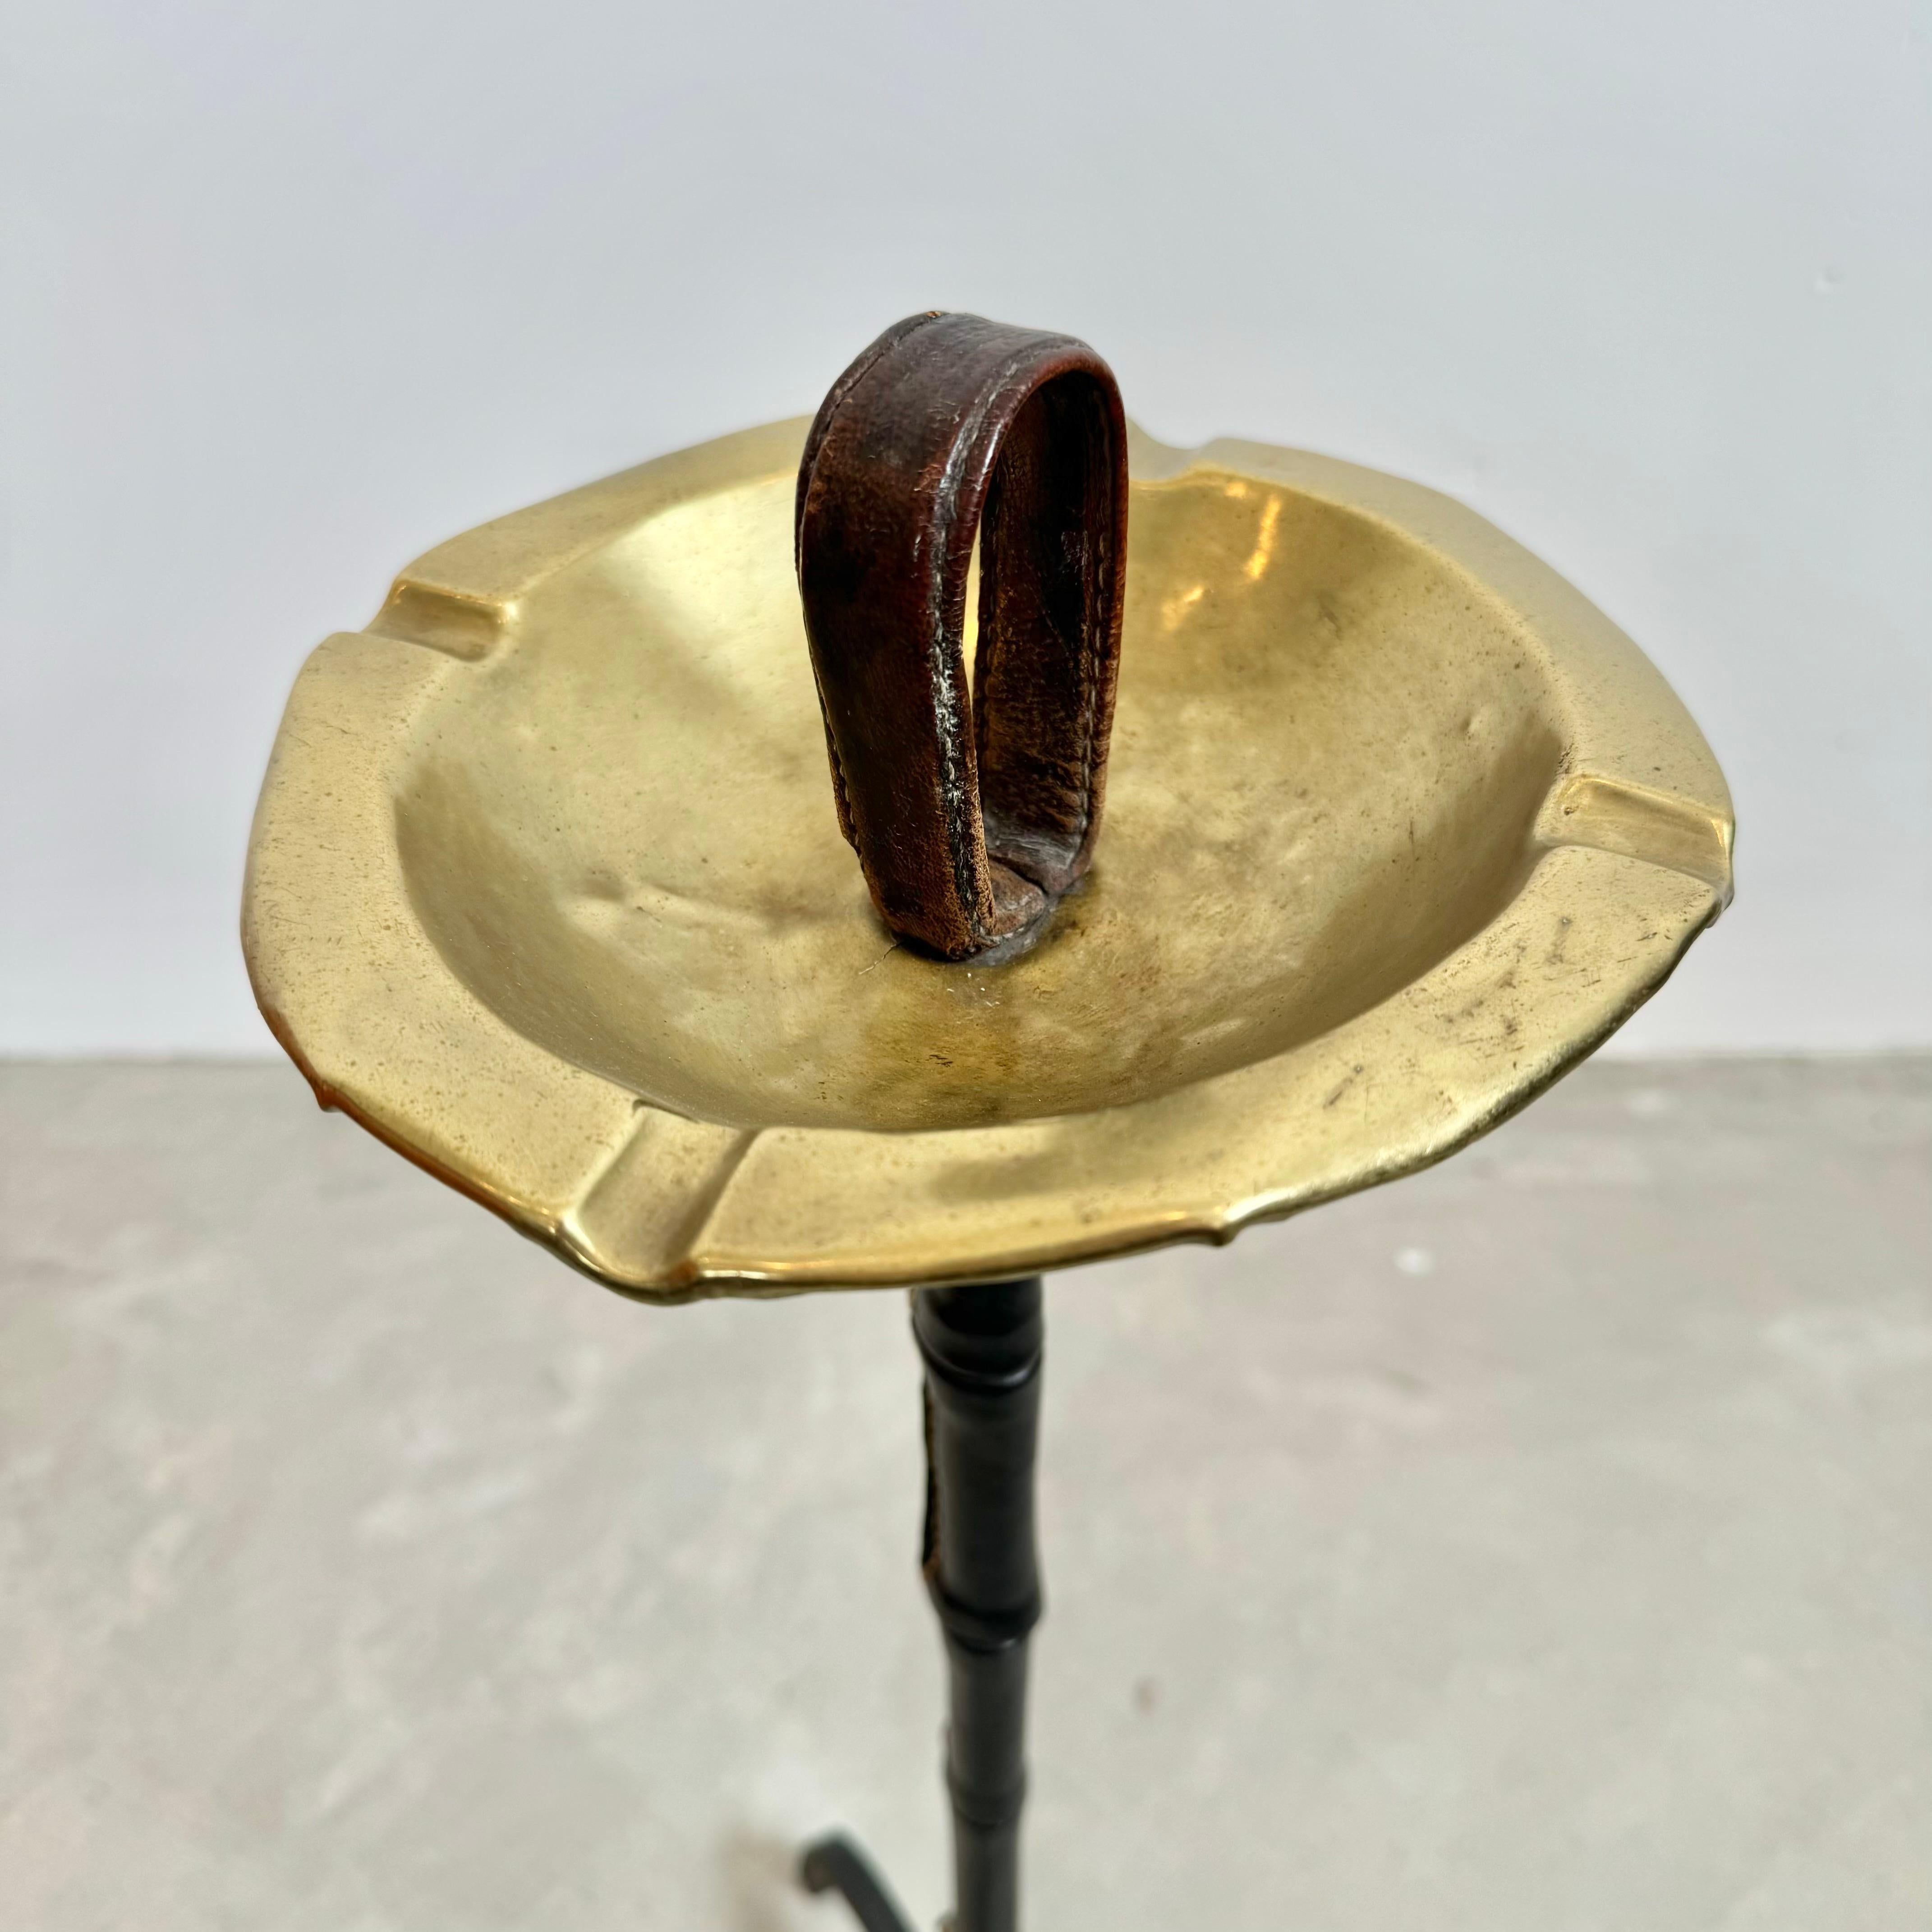 Mid-20th Century Jacques Adnet Leather and Brass Floor Ashtray, 1950s France For Sale